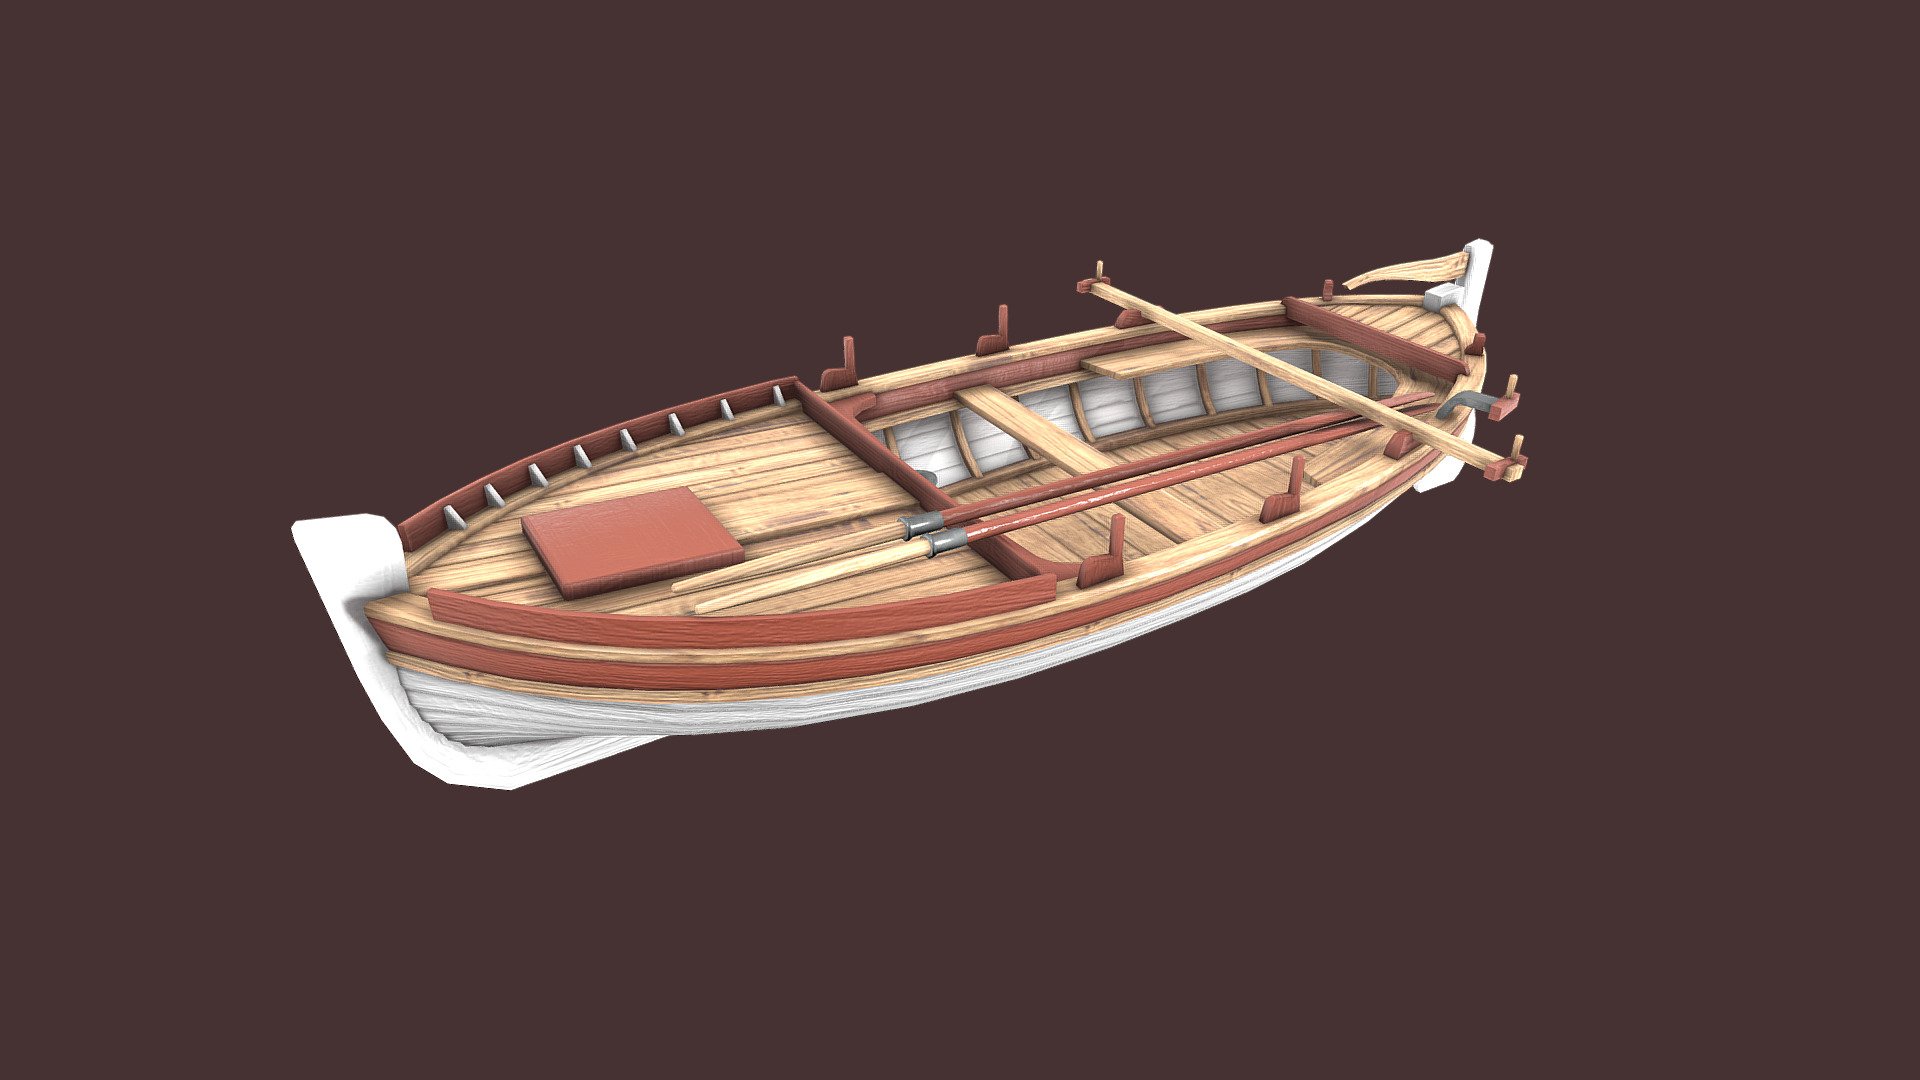 A relatively low-poly (4.5K polygons) 3D model of a traditional Croatian boat &lsquo;Guc'. Made in Blender 3D and Adobe Substance Painter as part of an interactive VR project created in 2022 by Delta Reality, a VR/AR/MR company from Zagreb, Croatia 3d model